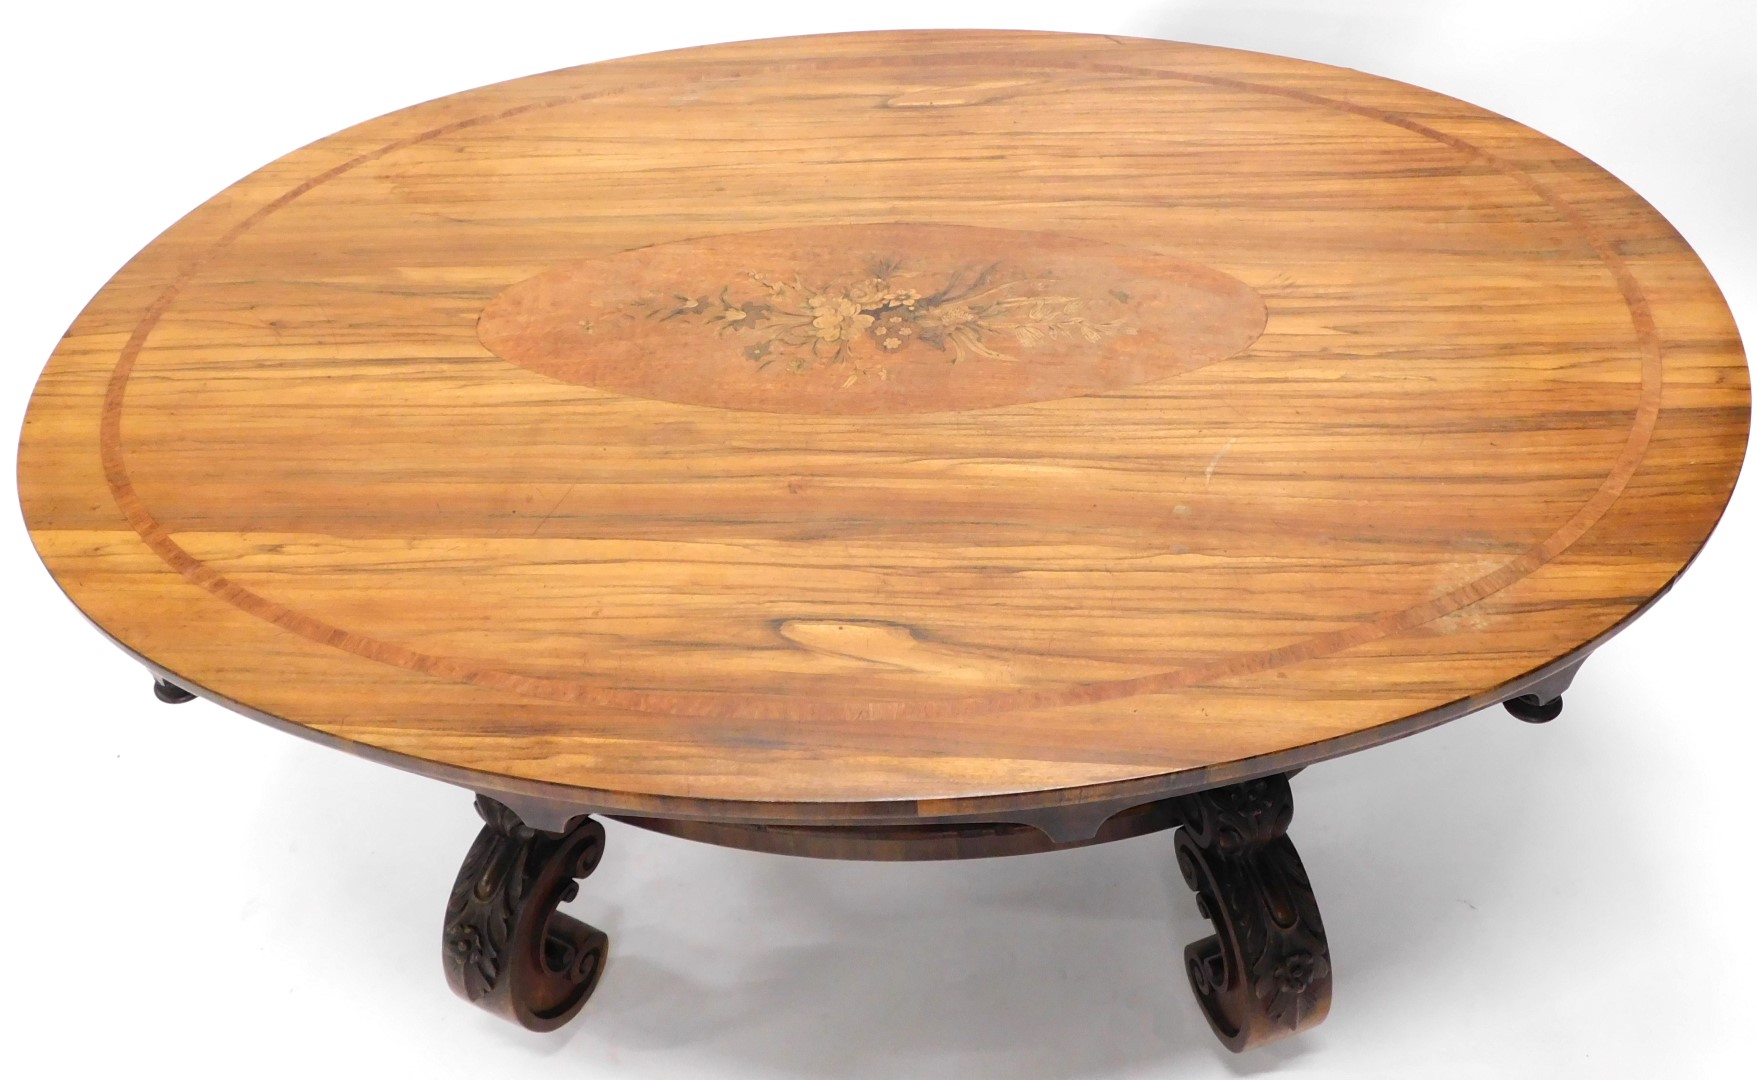 A 19thC rosewood and marquetry centre table, the oval top inlaid with a spray of flowers and leaves, - Image 2 of 2